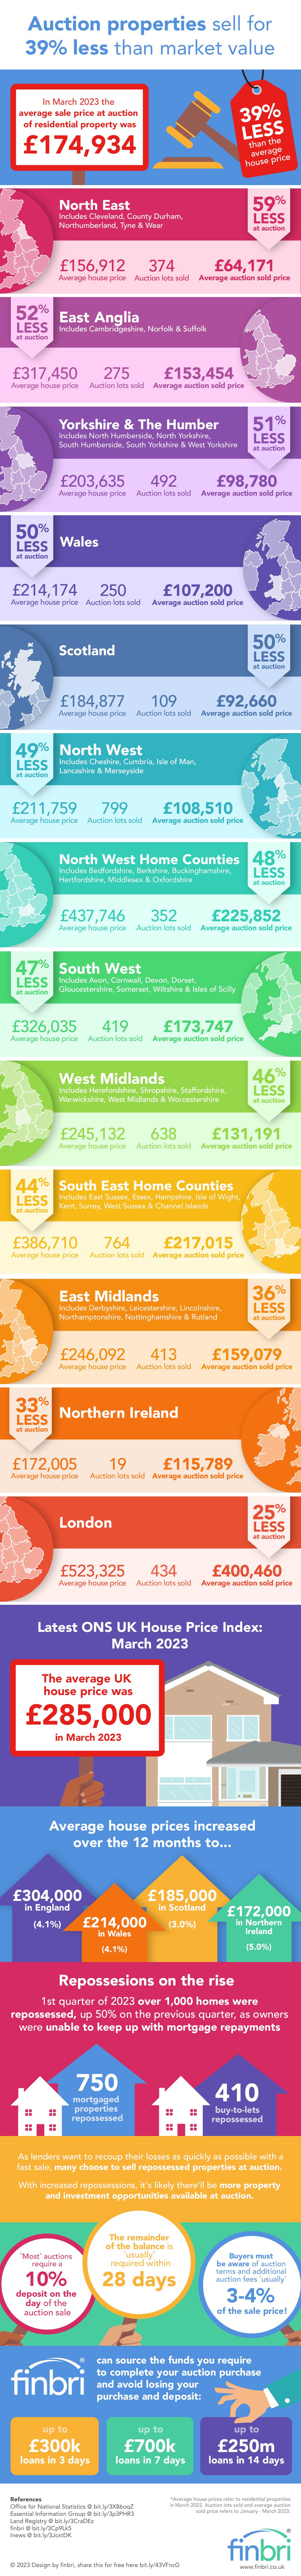 Infographic about how auction properties sell for 39% less than the average house price.